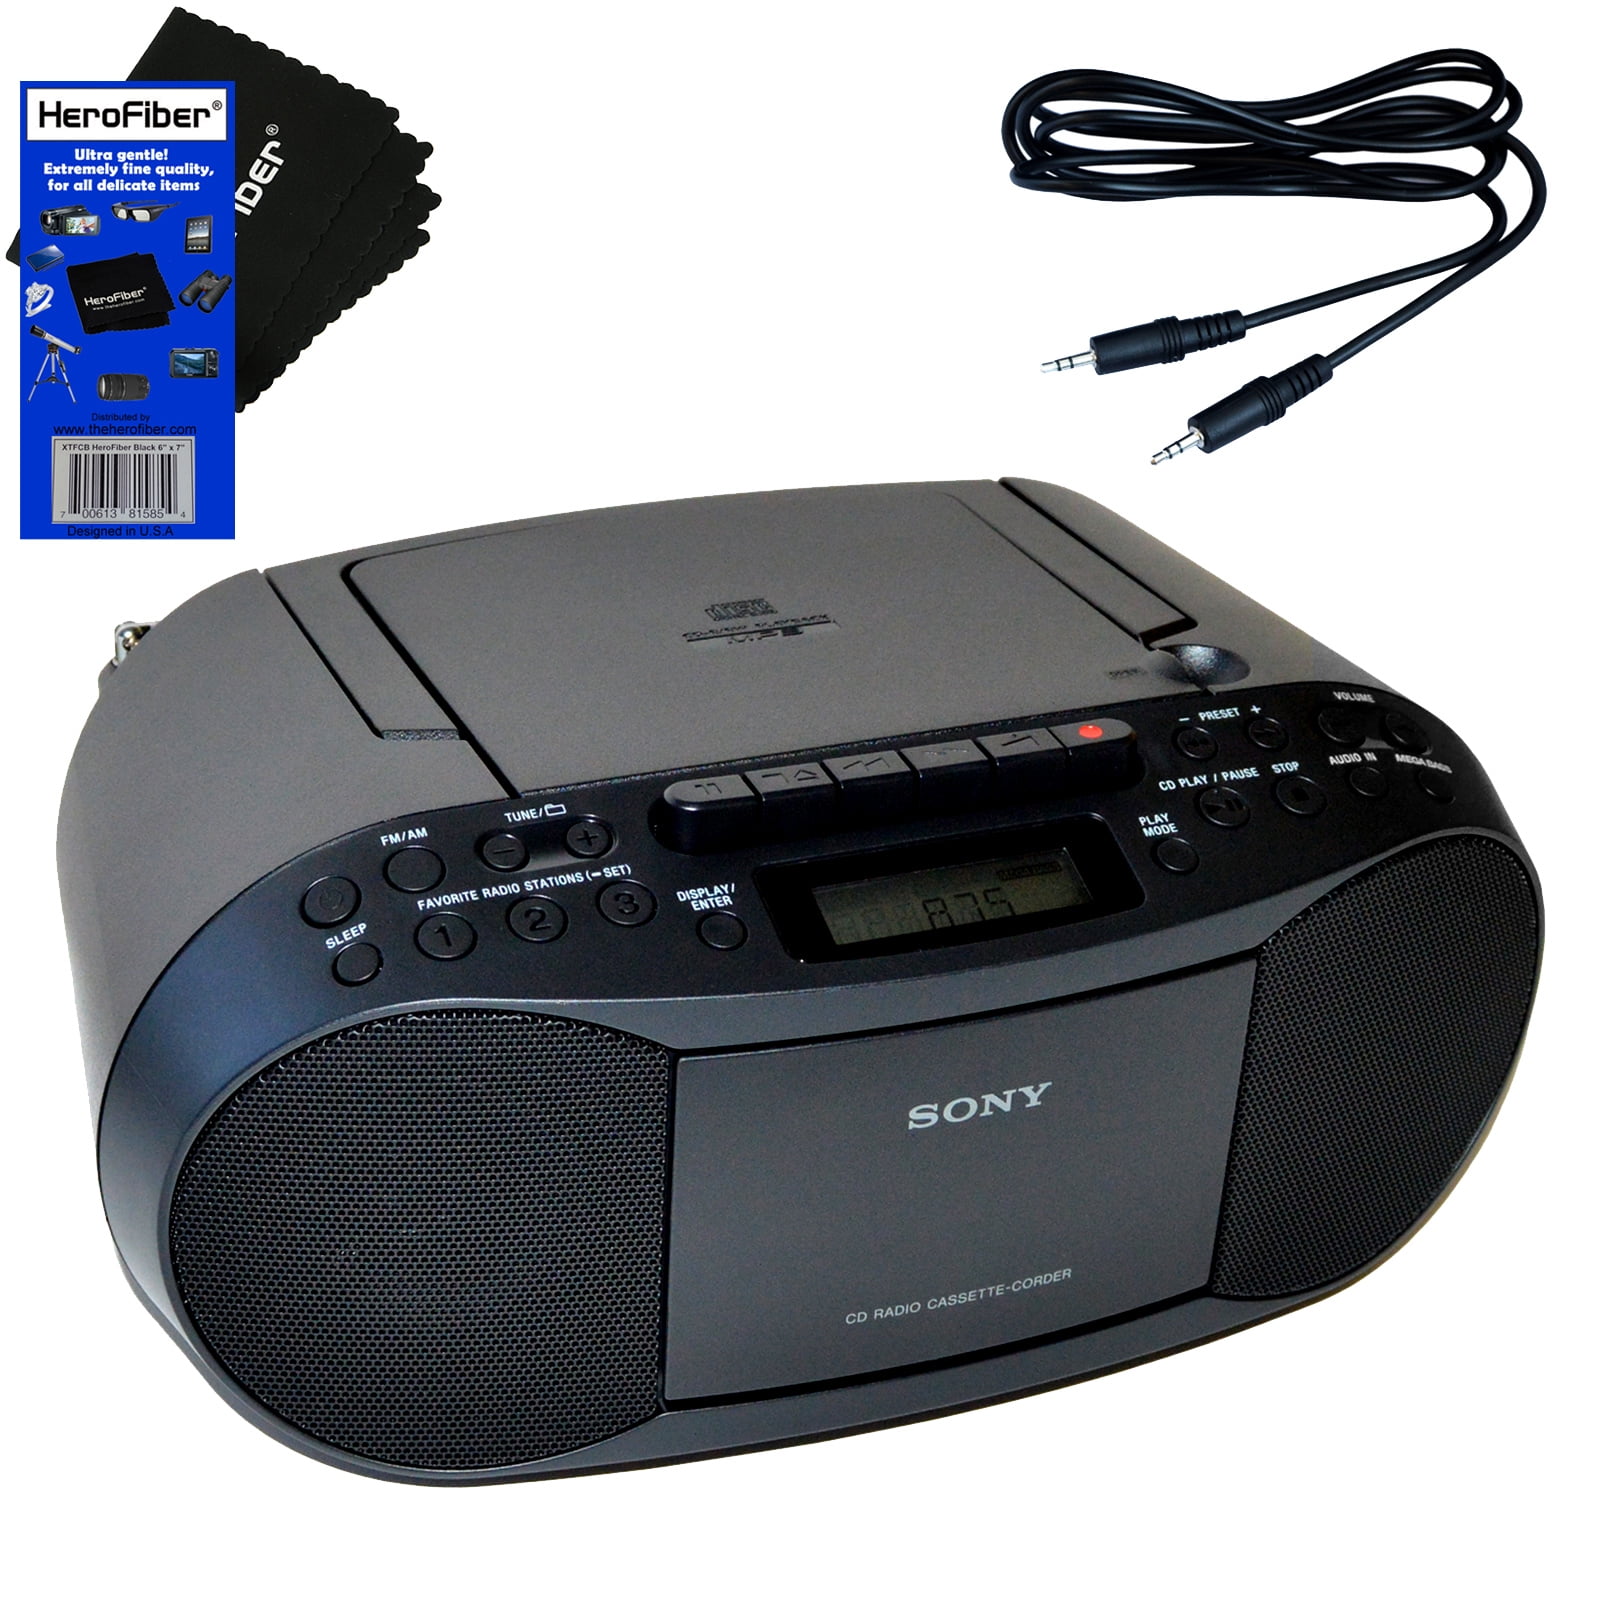 Sony Portable CD Player Boombox with AM/FM Radio & Cassette Tape Player +  Auxiliary Cable for Smartphones, MP3 Players & HeroFiber Ultra Gentle 